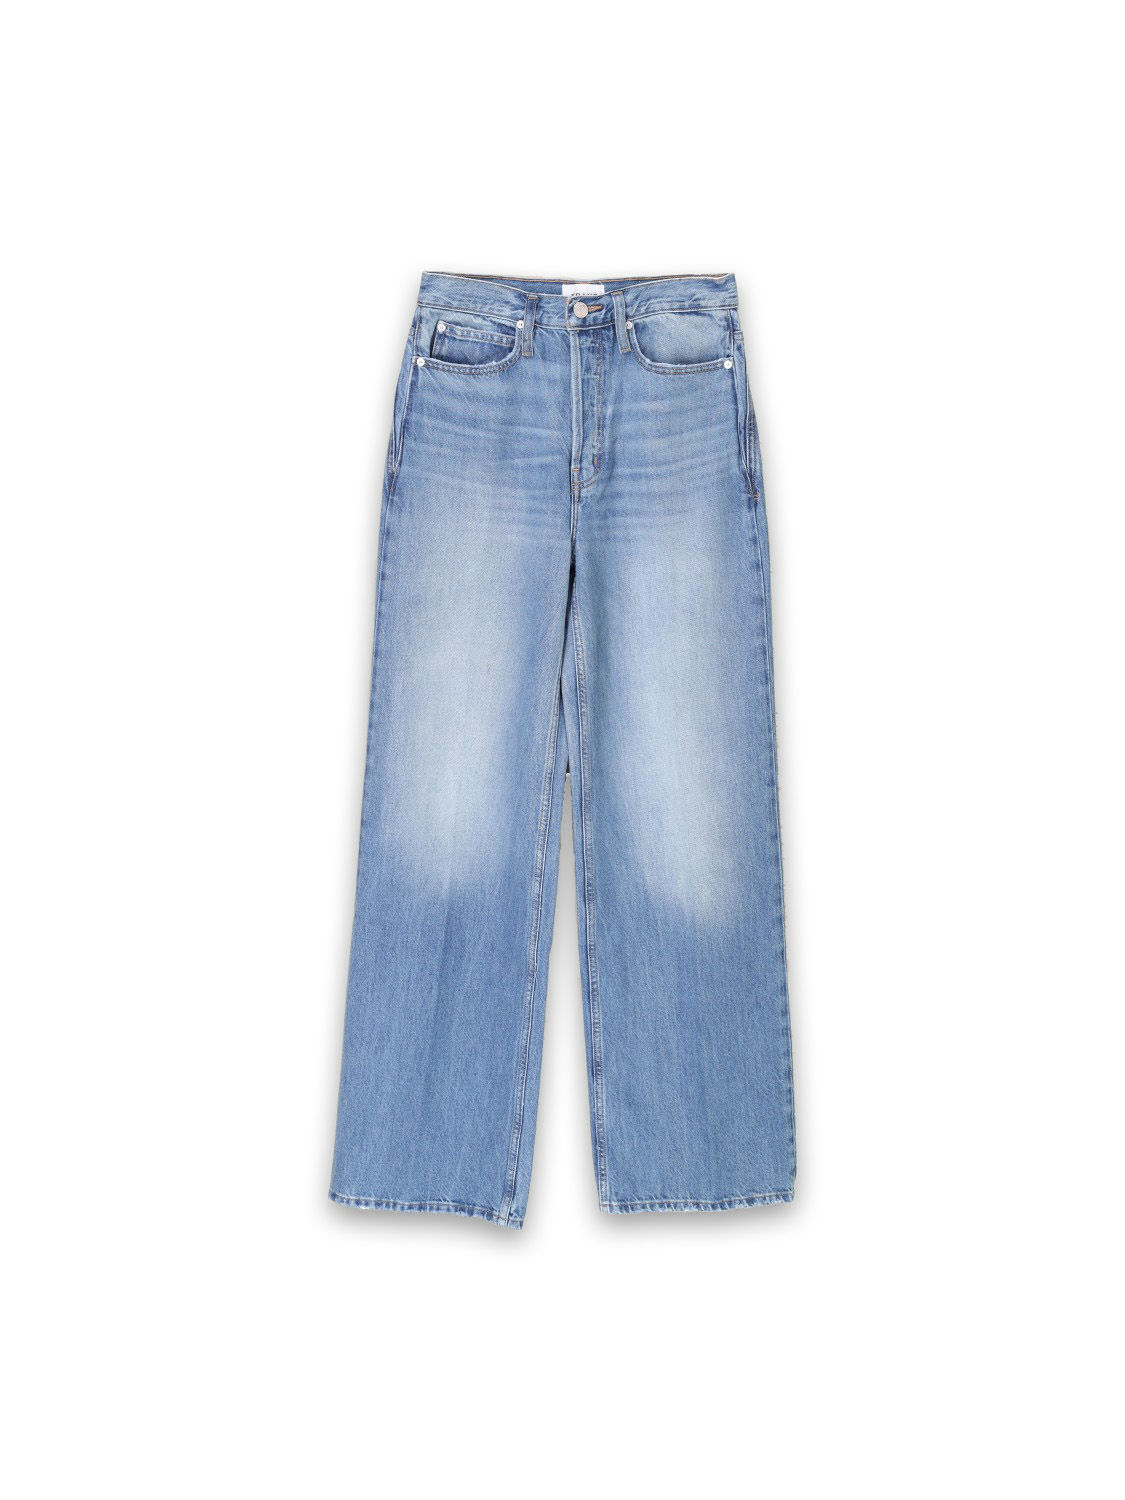 The 1978 - Light-colored jeans with wide leg 